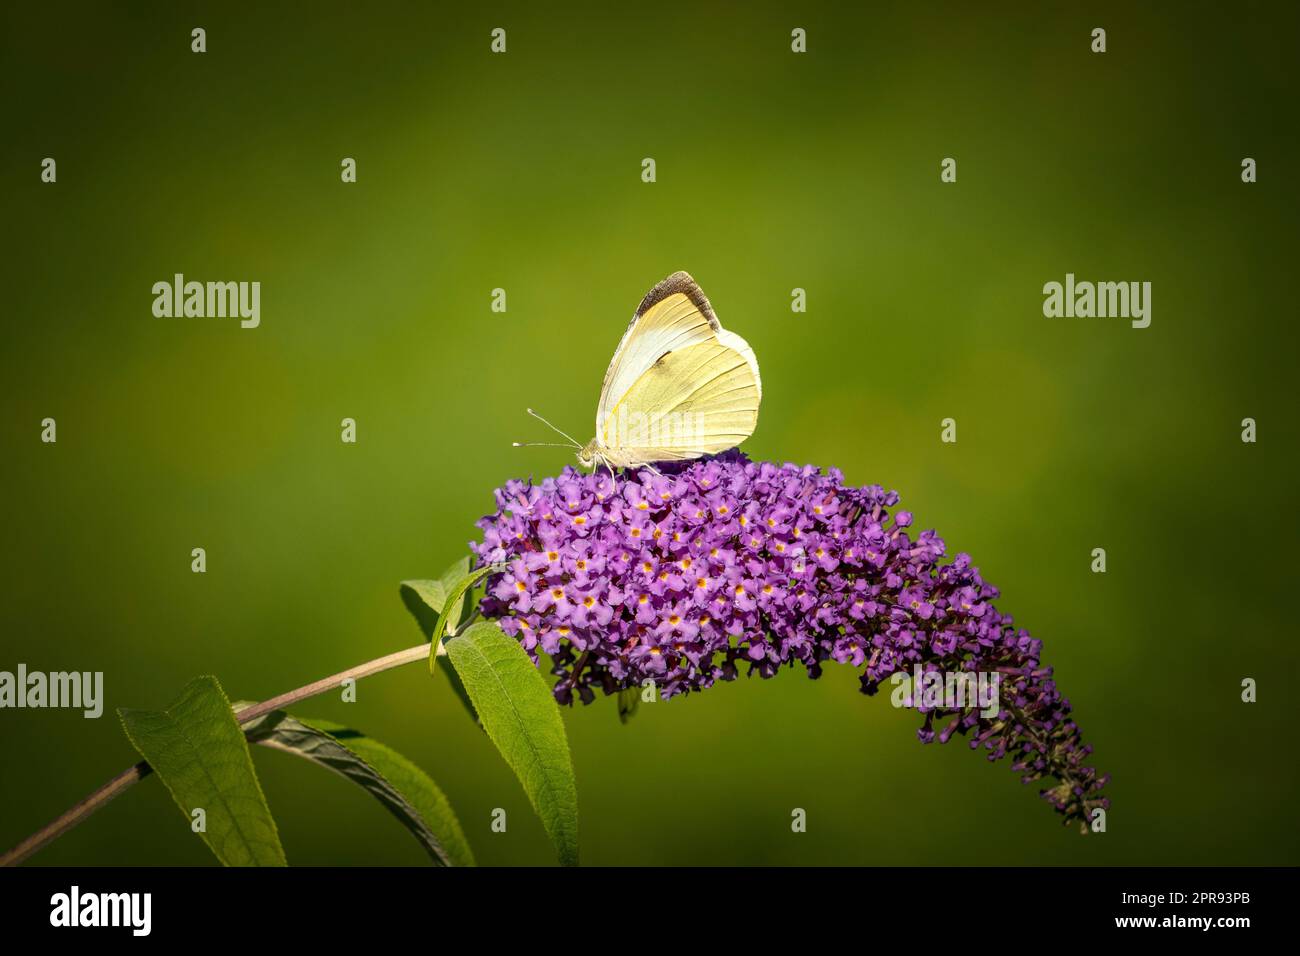 Cabbage white butterfly on the purple plant Stock Photo